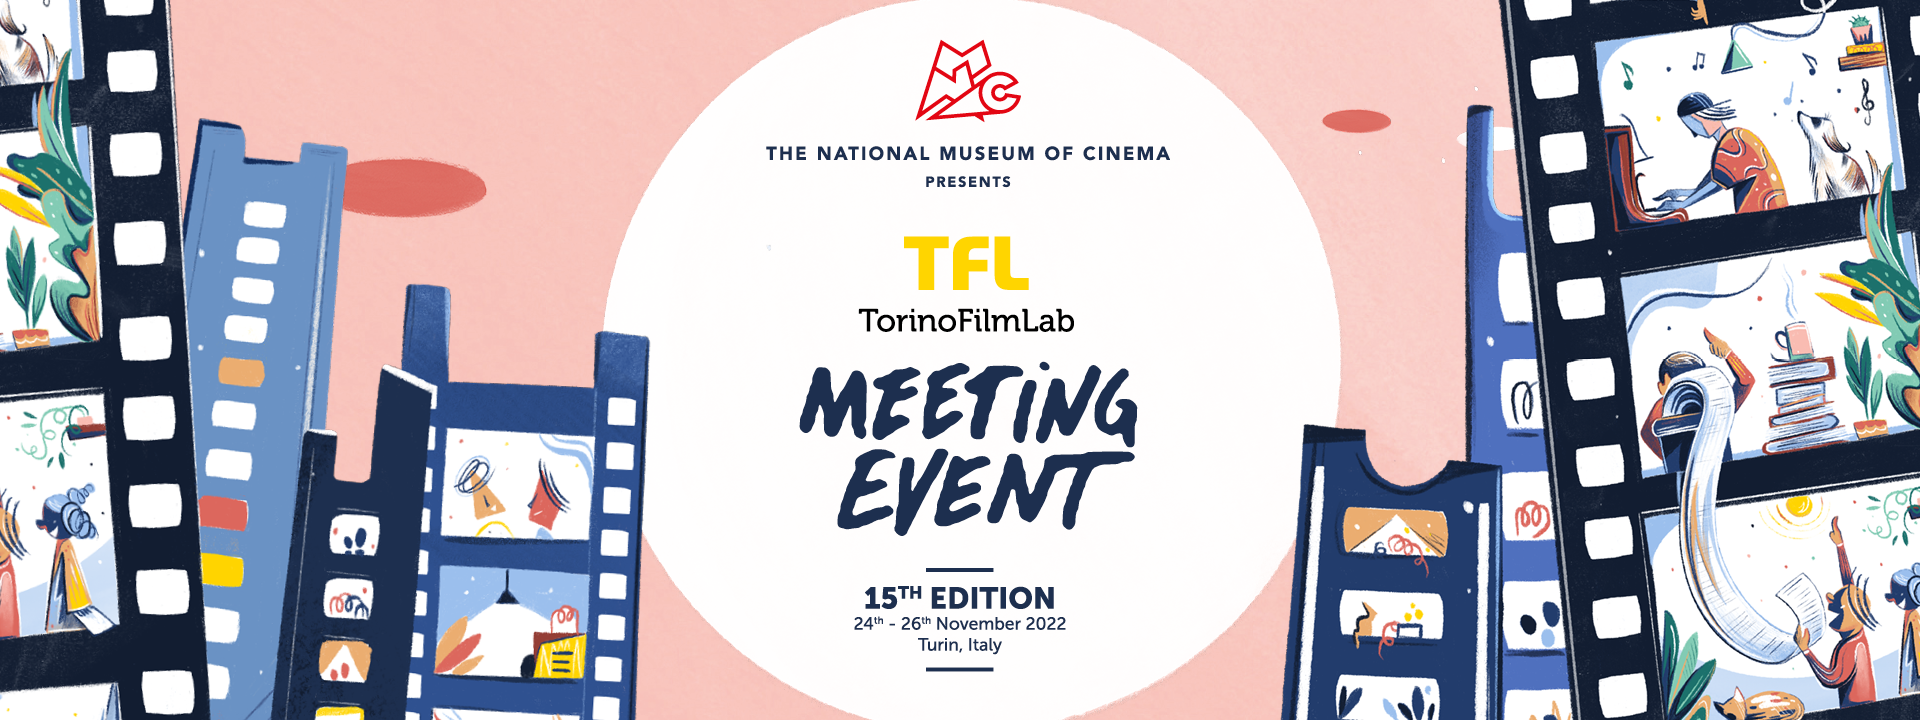 TFL MEETING EVENT 15th Edition: 3 days left